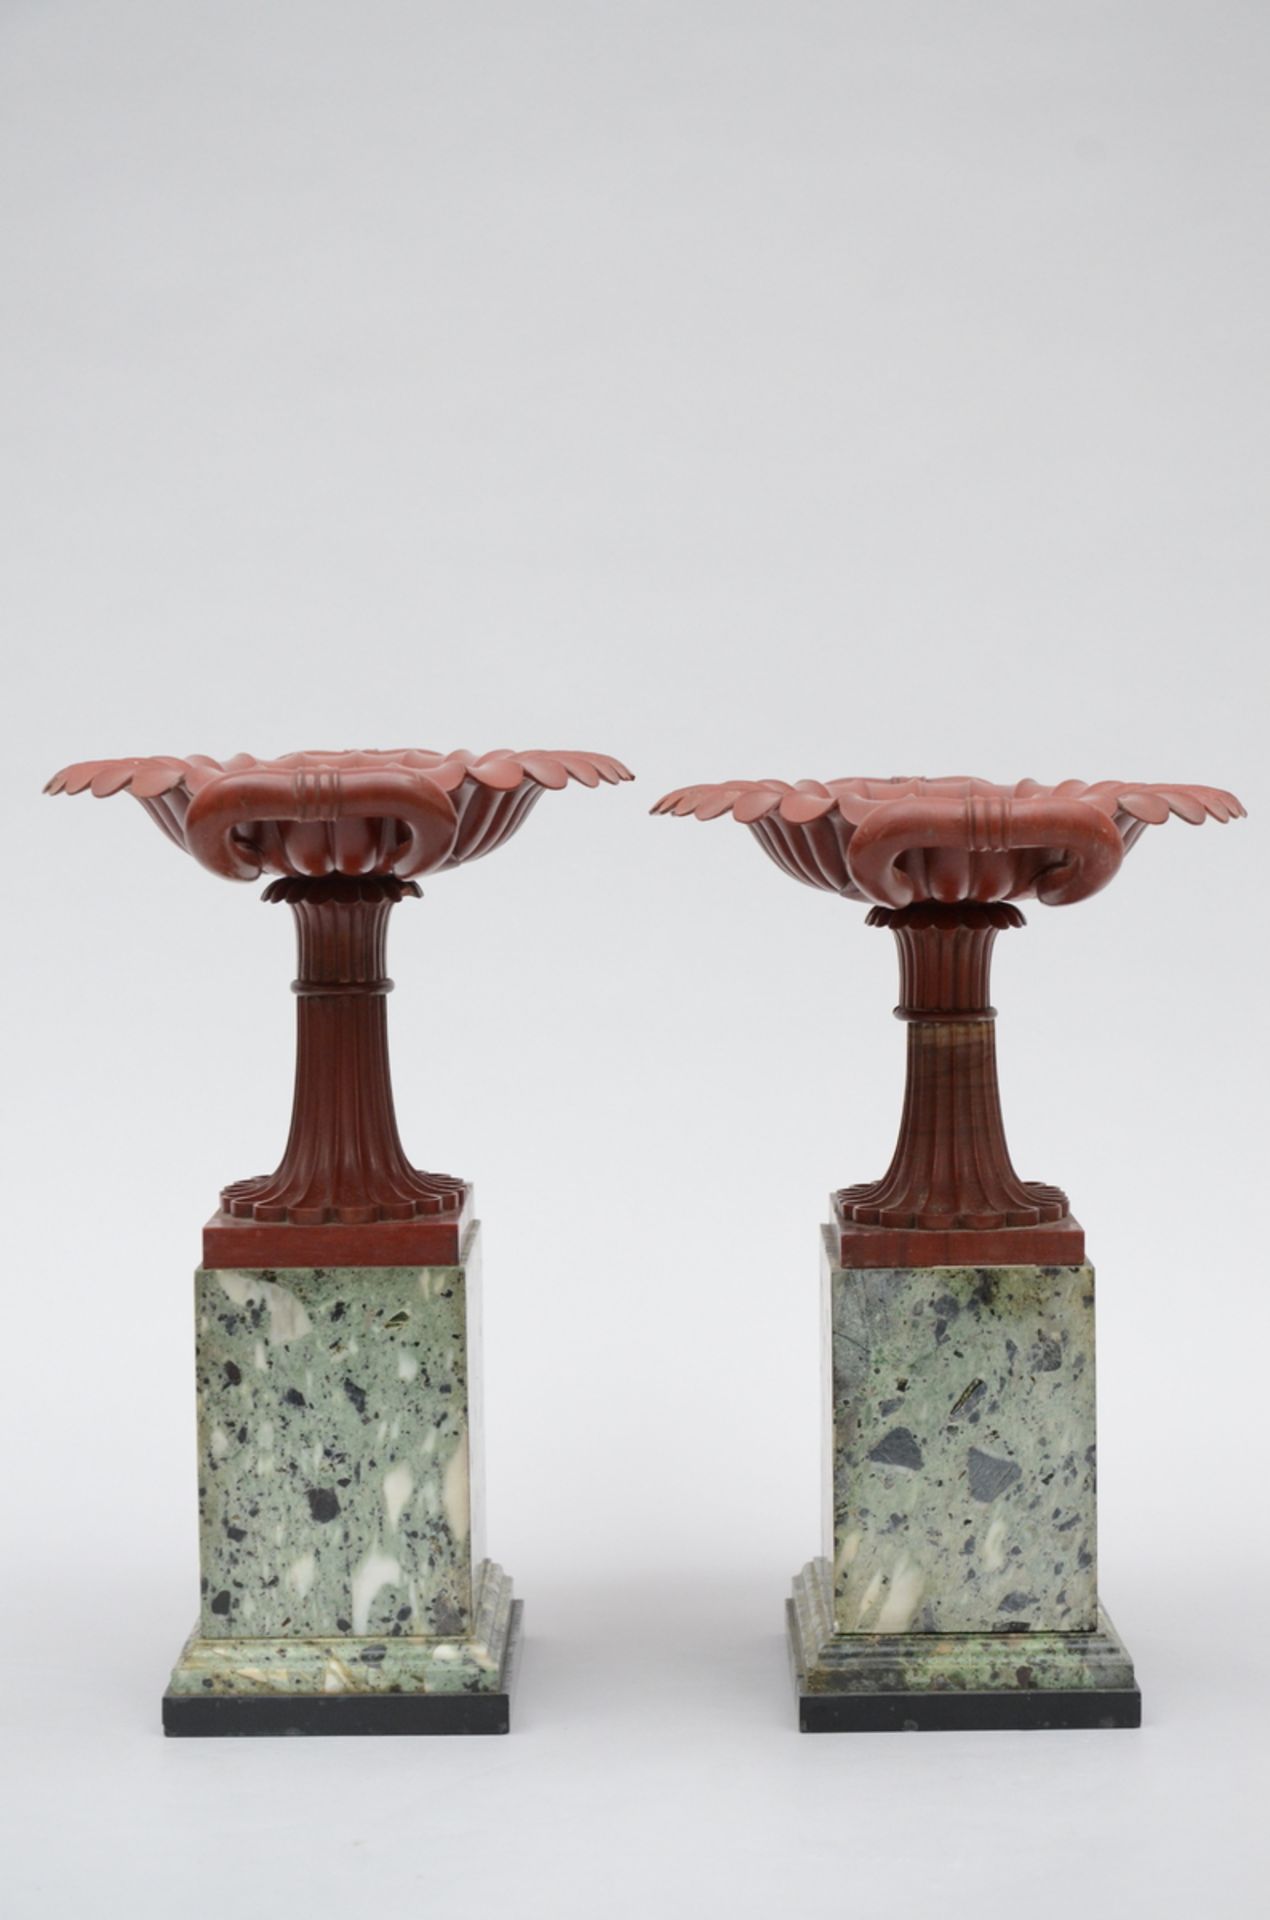 Two fine marble tazza coupes, 19th century (34x39x23cm) (*) - Image 4 of 7